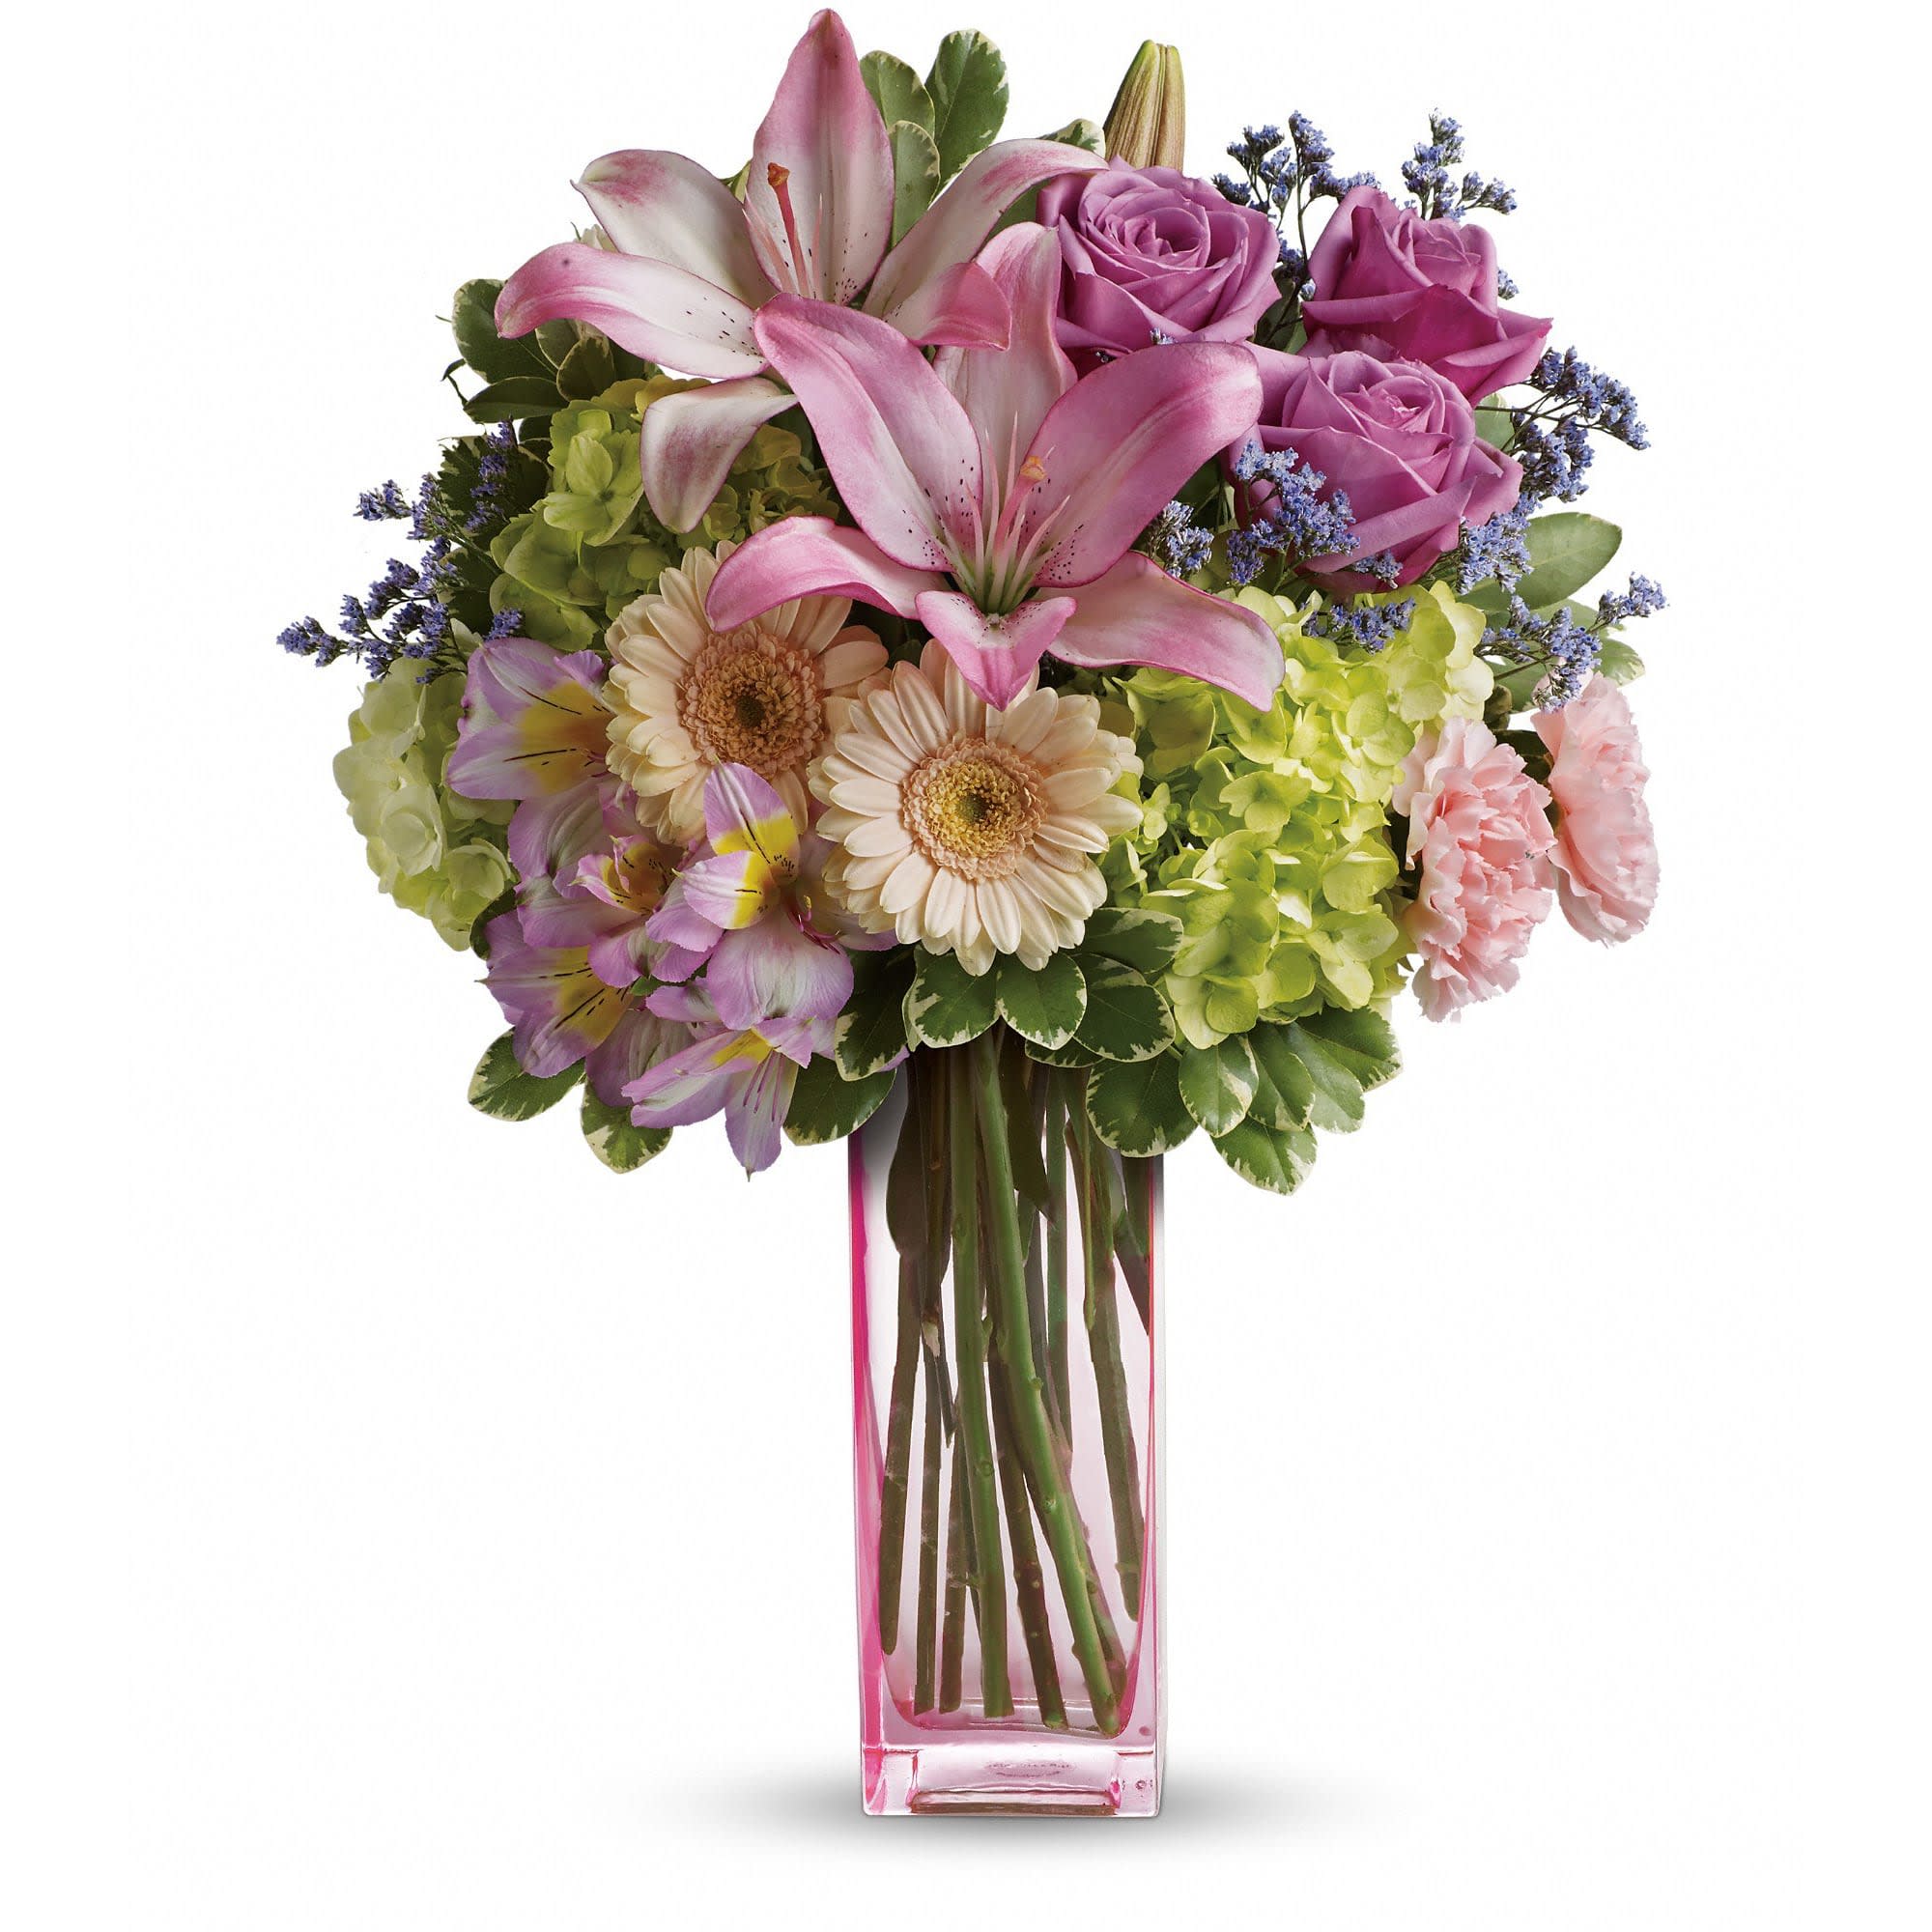 Artfully Yours - Sweep her off her feet, say Happy Birthday, or simply brighten an ordinary day with the breathtaking beauty of this luxurious arrangement. Hand-delivered in a gorgeous pink glass vase, this mix of hydrangea, roses, lilies and gerberas is a gift she'll never forget!